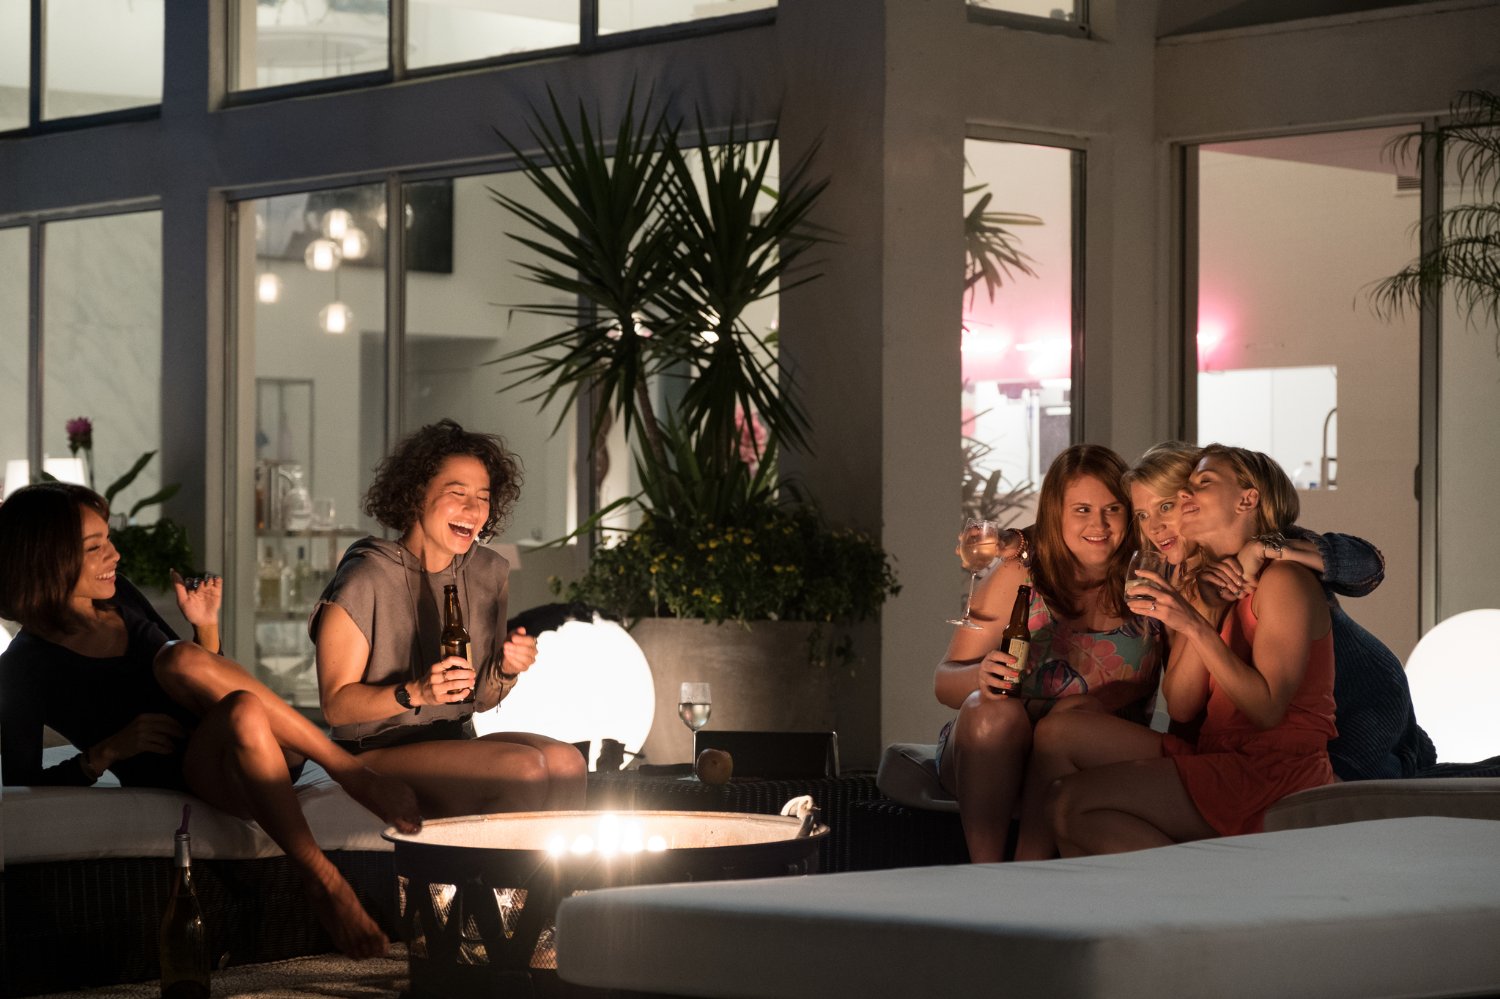 Film review: 'Rough Night